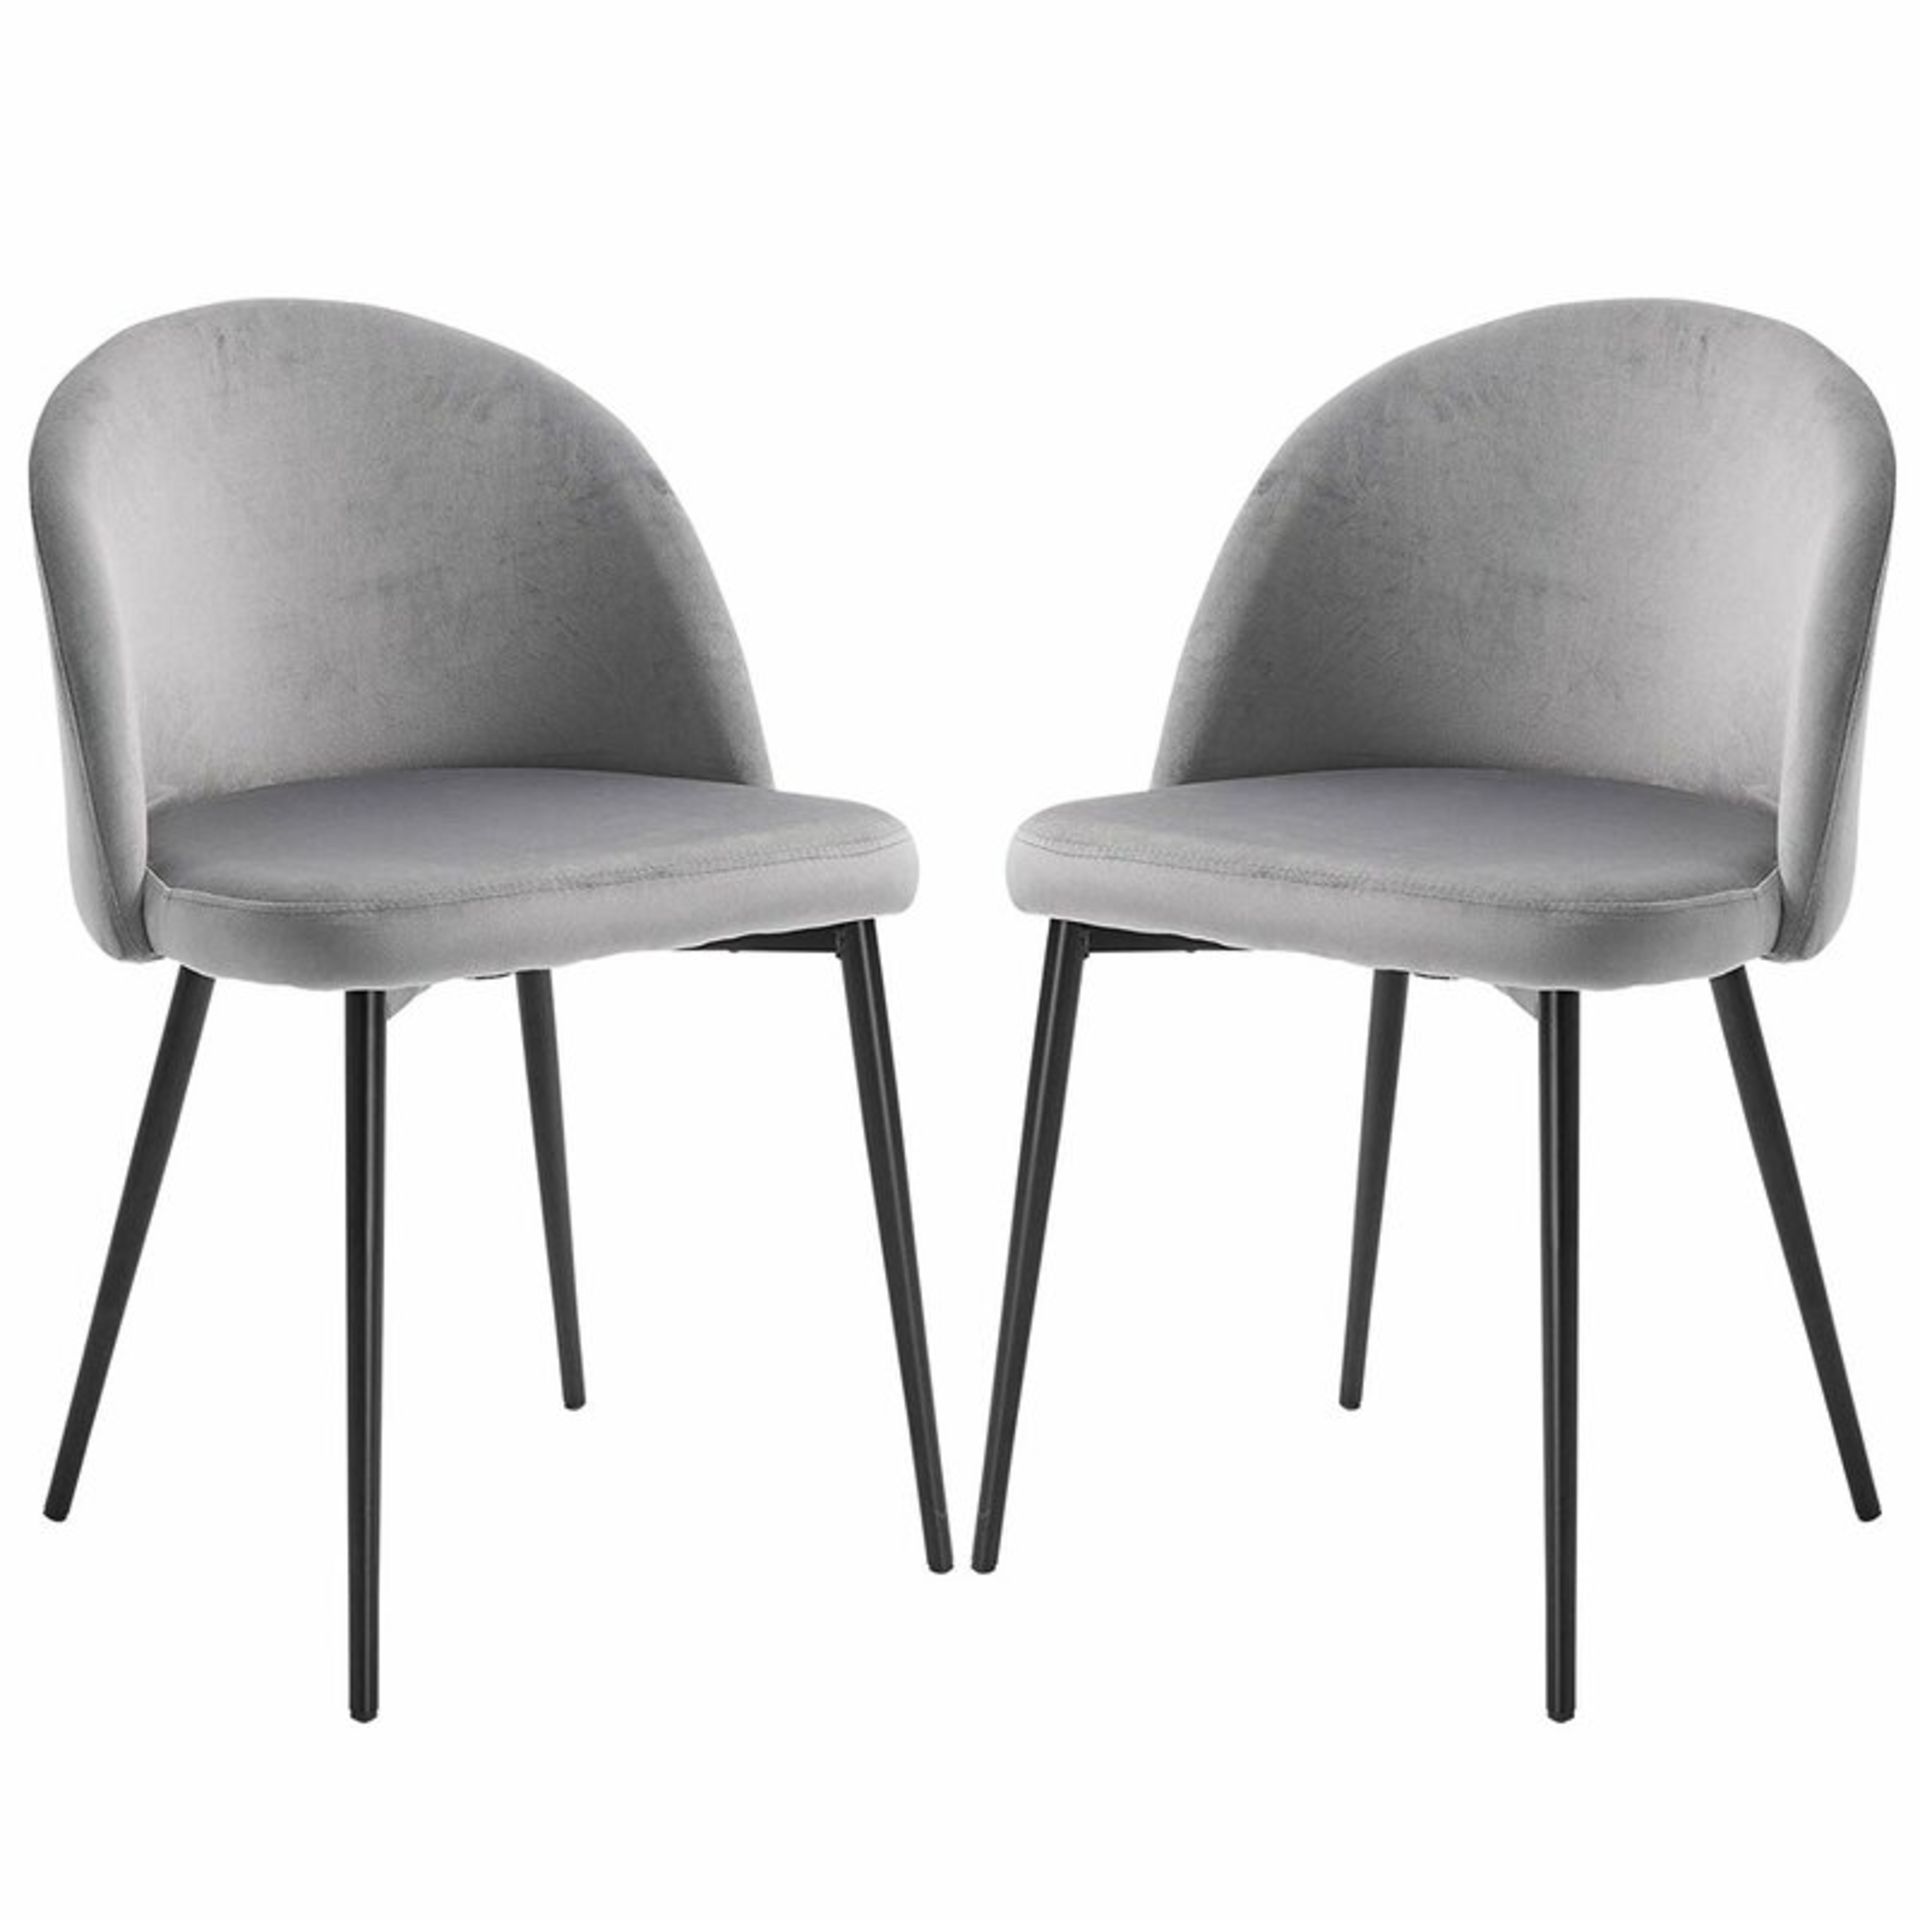 Ebern Design Grey Upholstered Dining Chair (Set of 2) - RRP £96.99